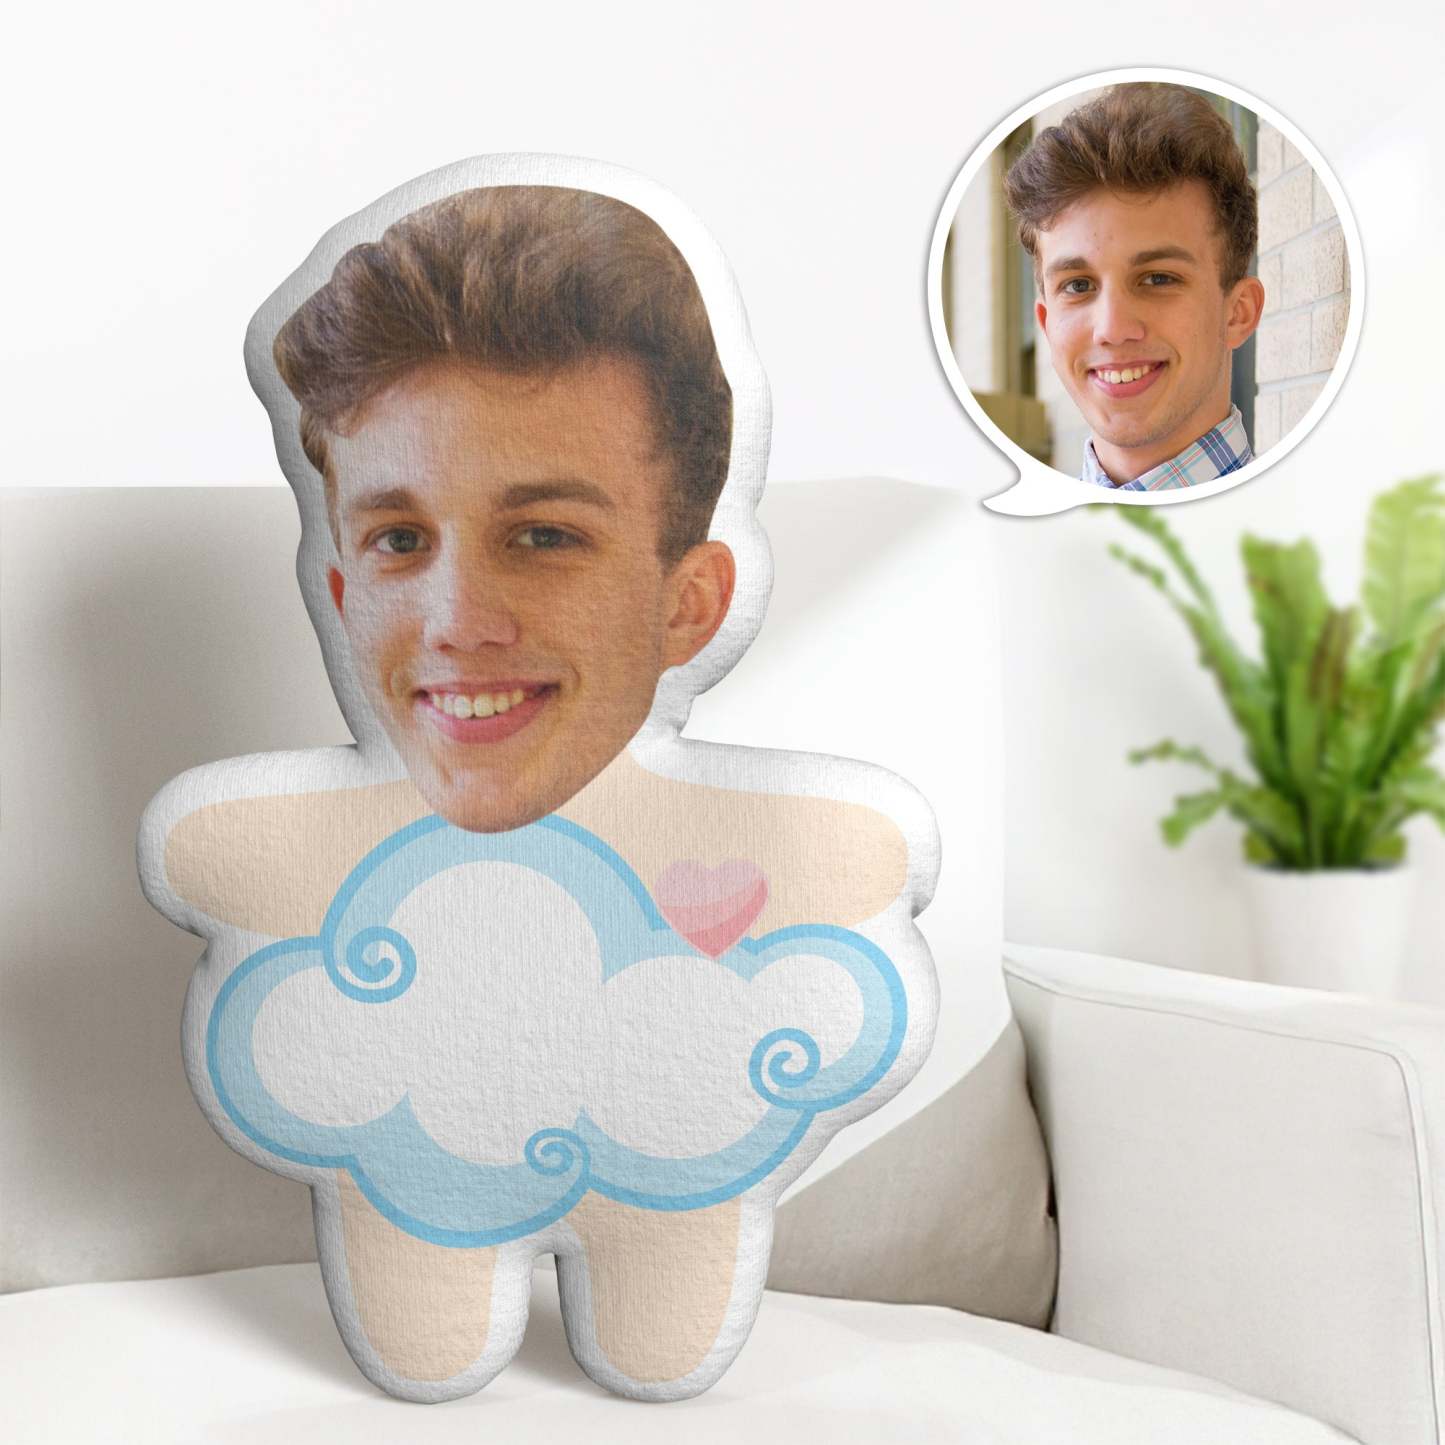 Personalised Face Minime Throw Pillow Custom Cloud Minime Pillow Valentine's Day Gifts - soufeeluk